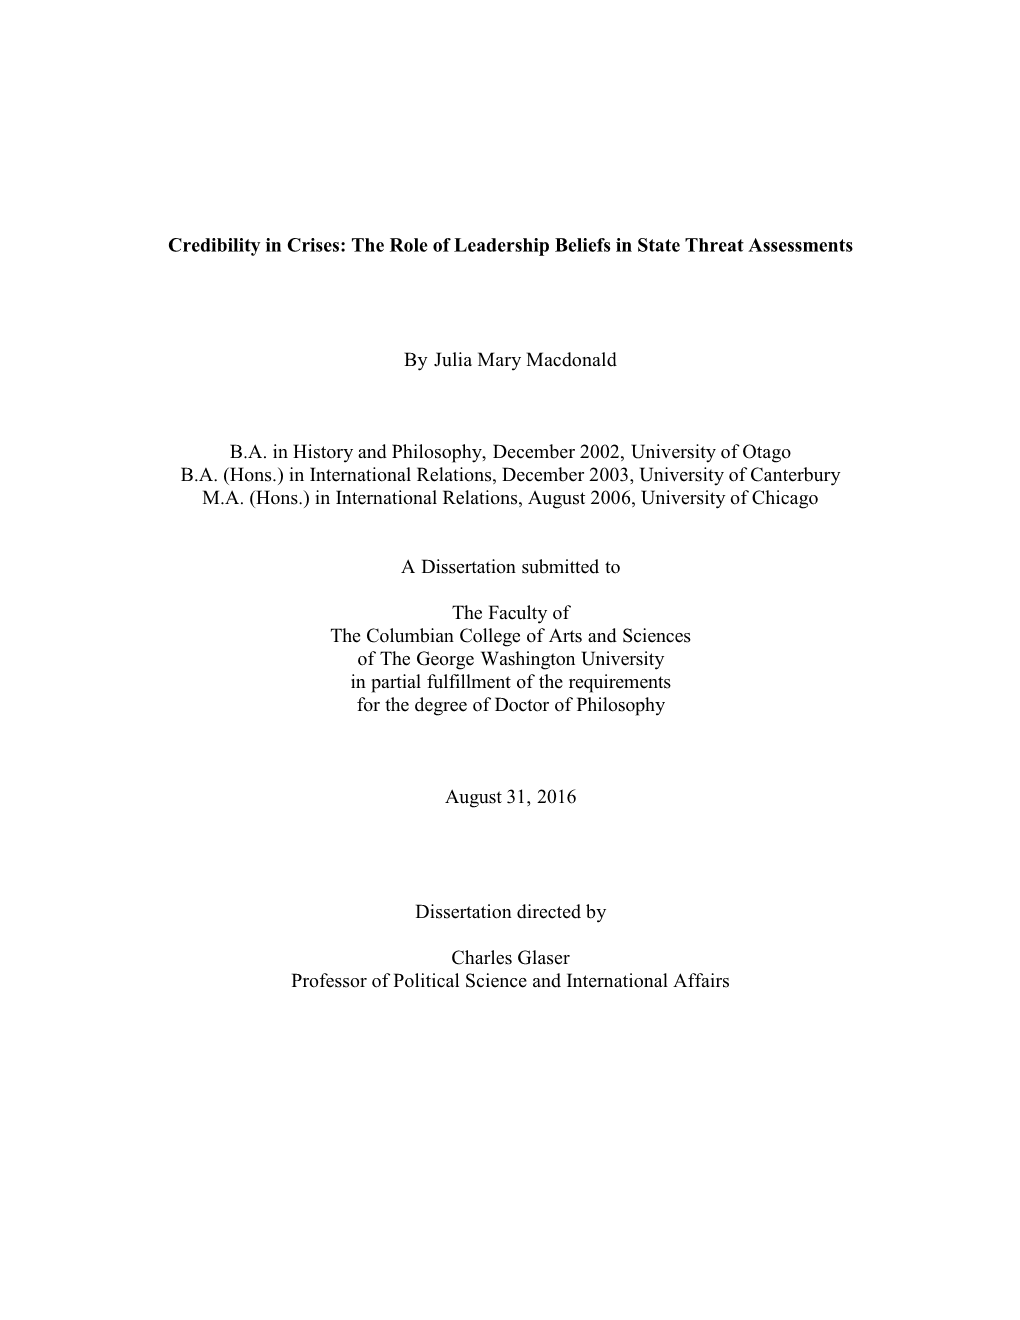 The Role of Leadership Beliefs in State Threat Assessments